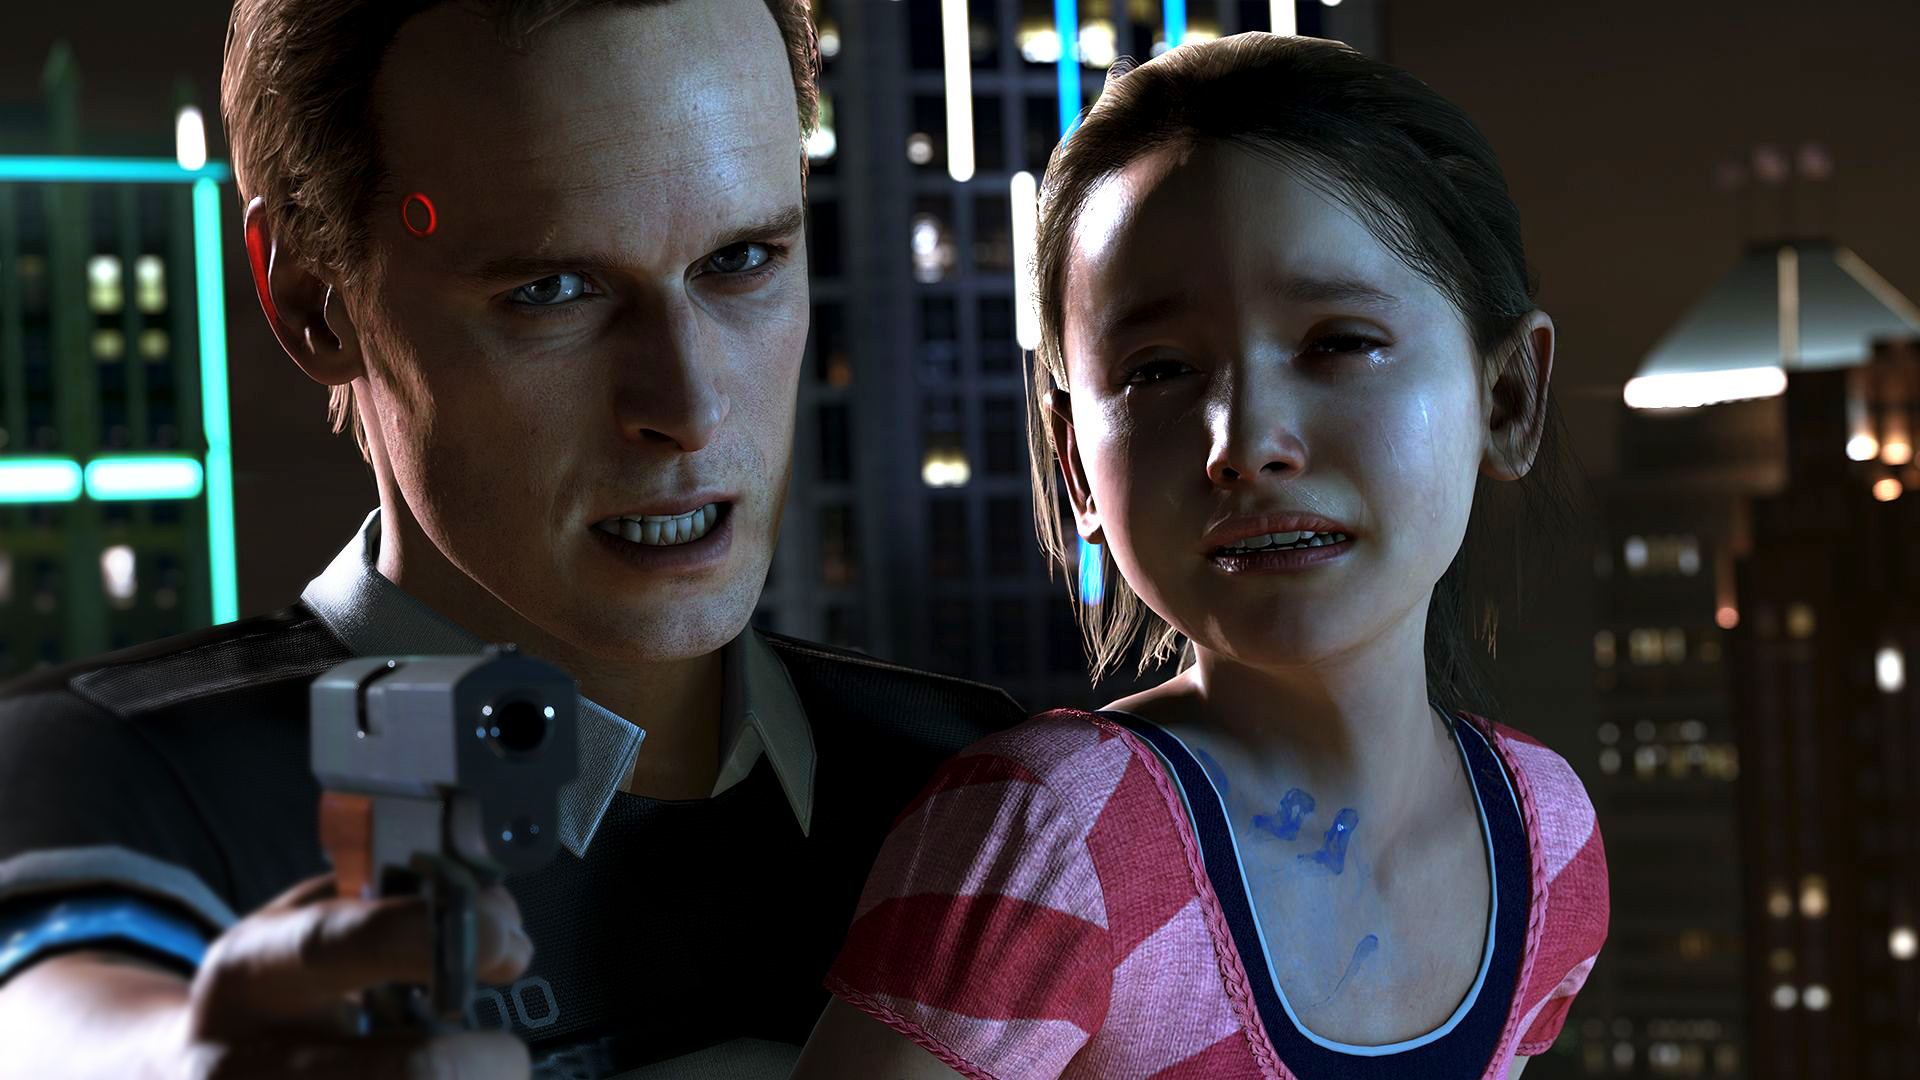 Detroit: Become Human Metacritic Score Indicates Another Exclusive